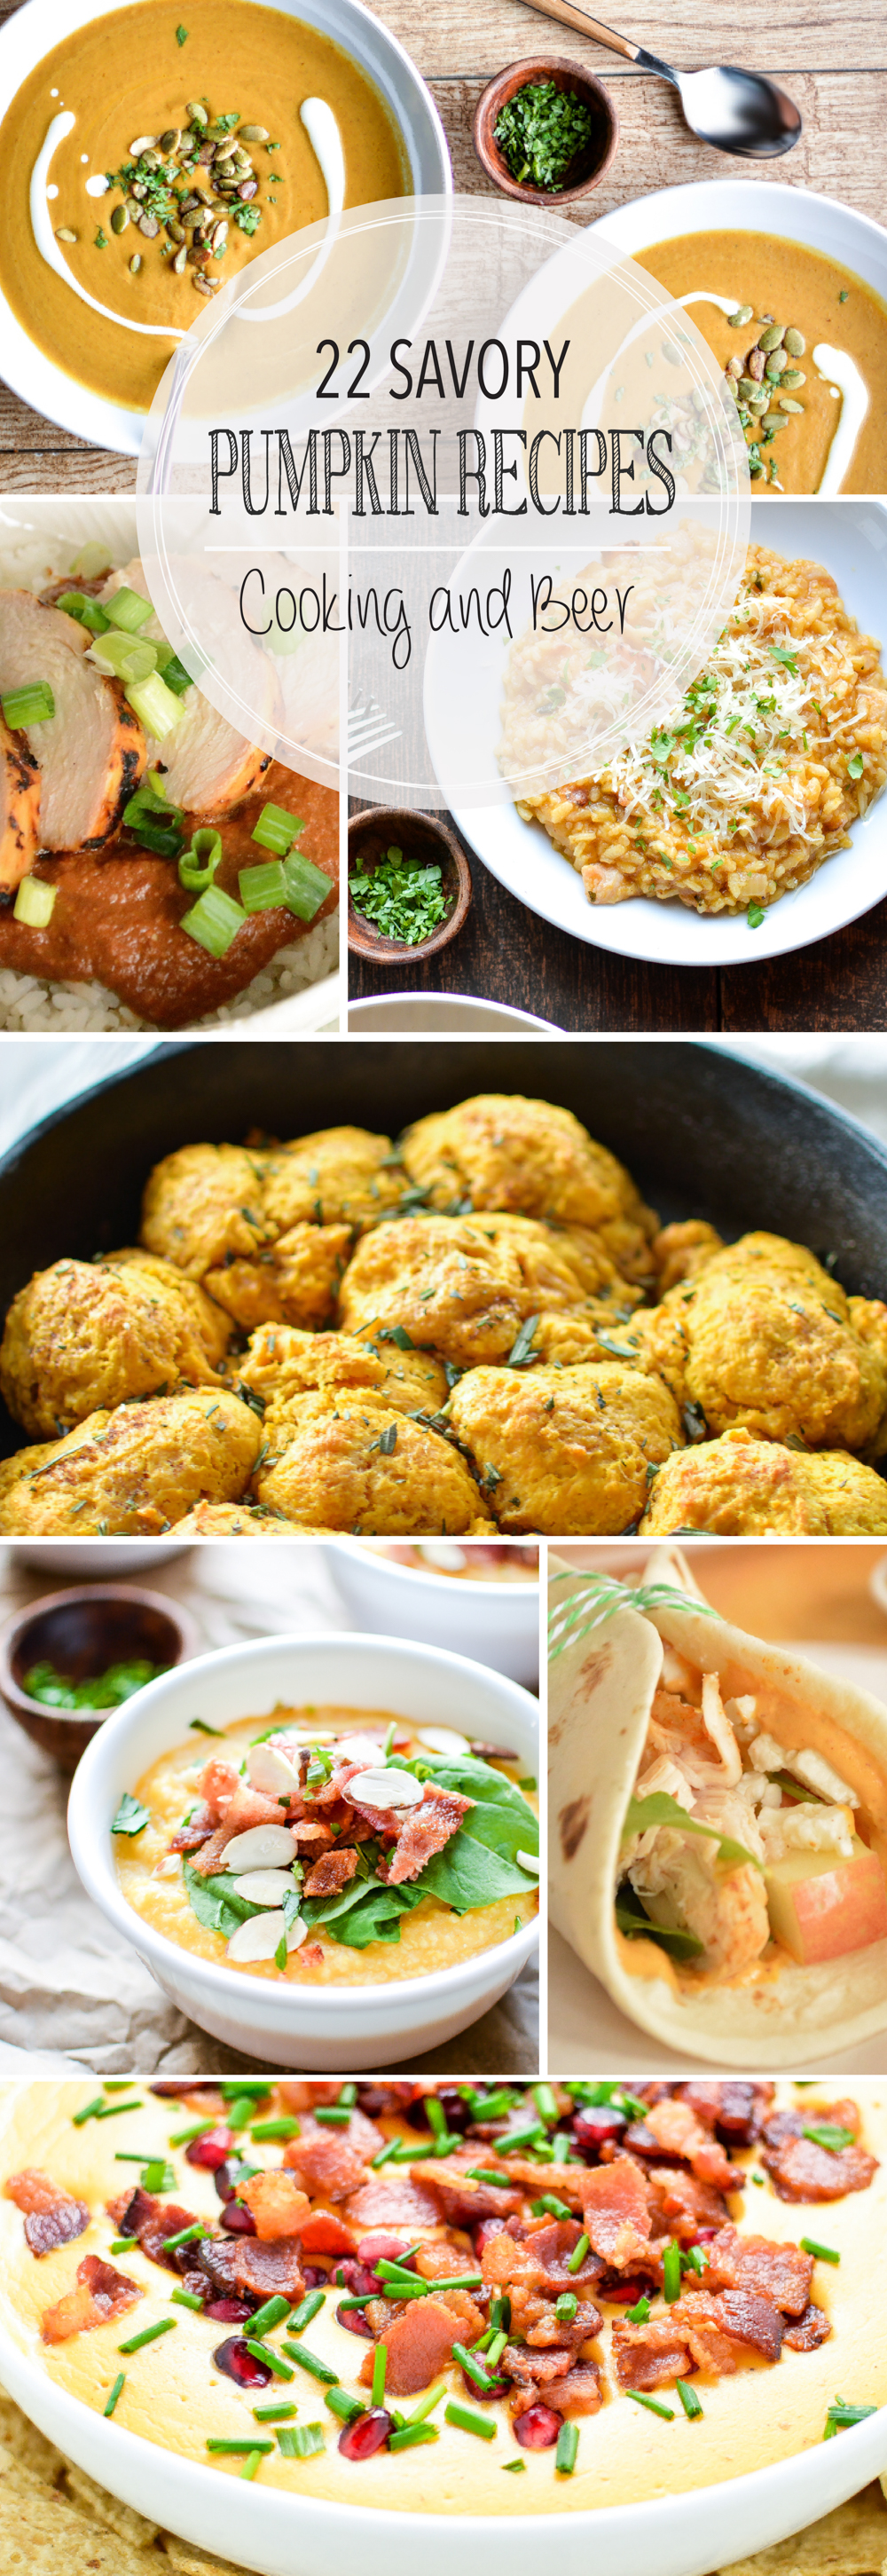 22 Savory Pumpkin Recipes - Cooking and BeerCooking and Beer